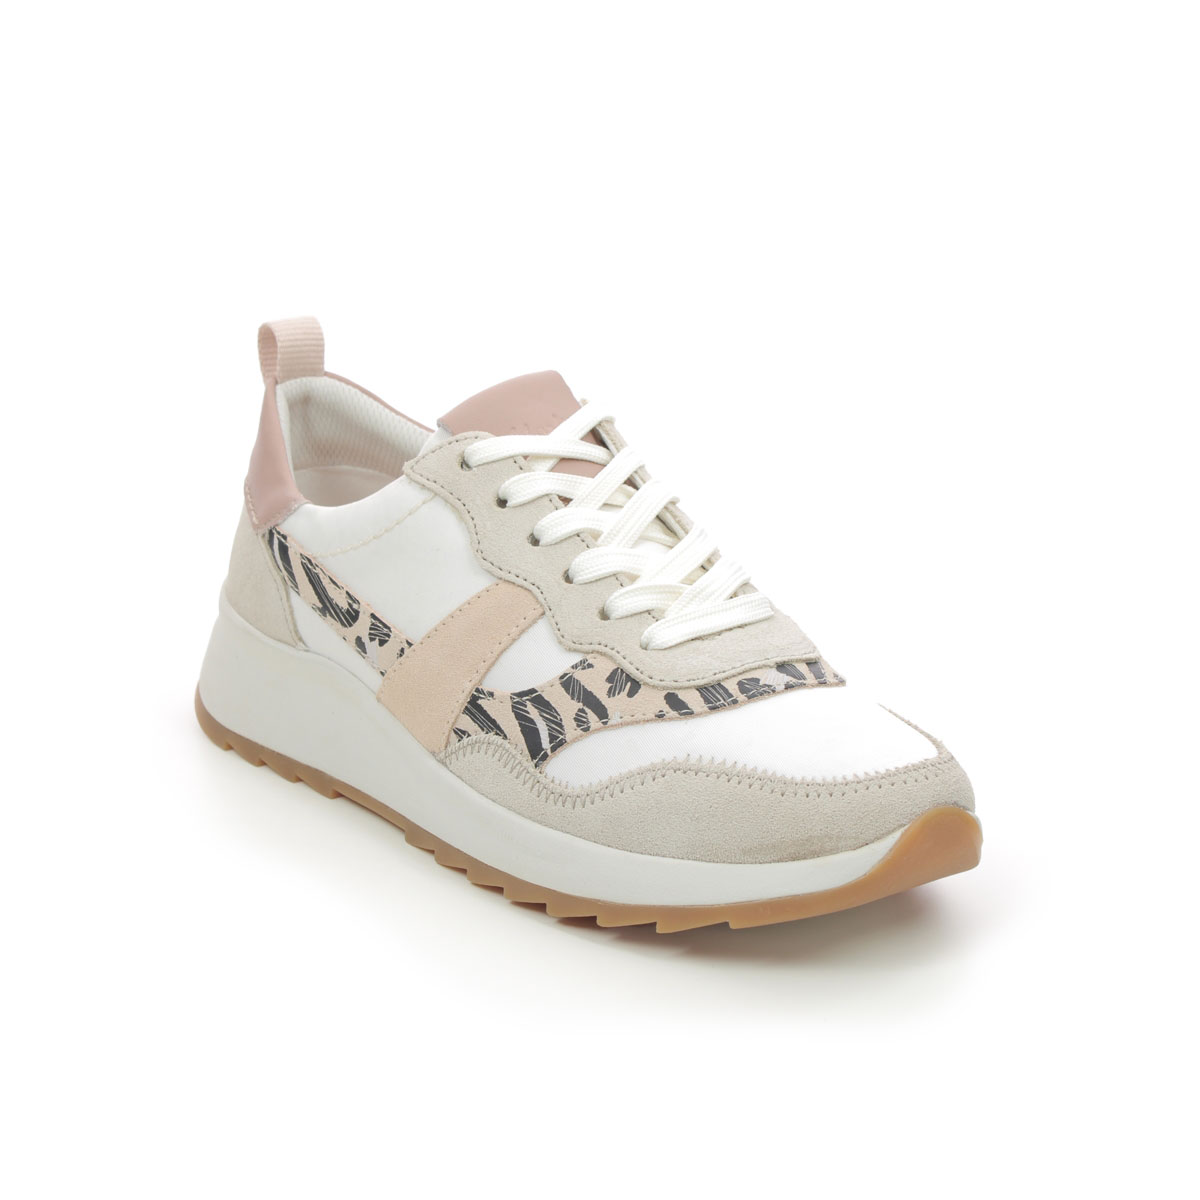 Clarks Dashlite Jazz White Pink Womens trainers 7042-94D in a Plain Leather in Size 7